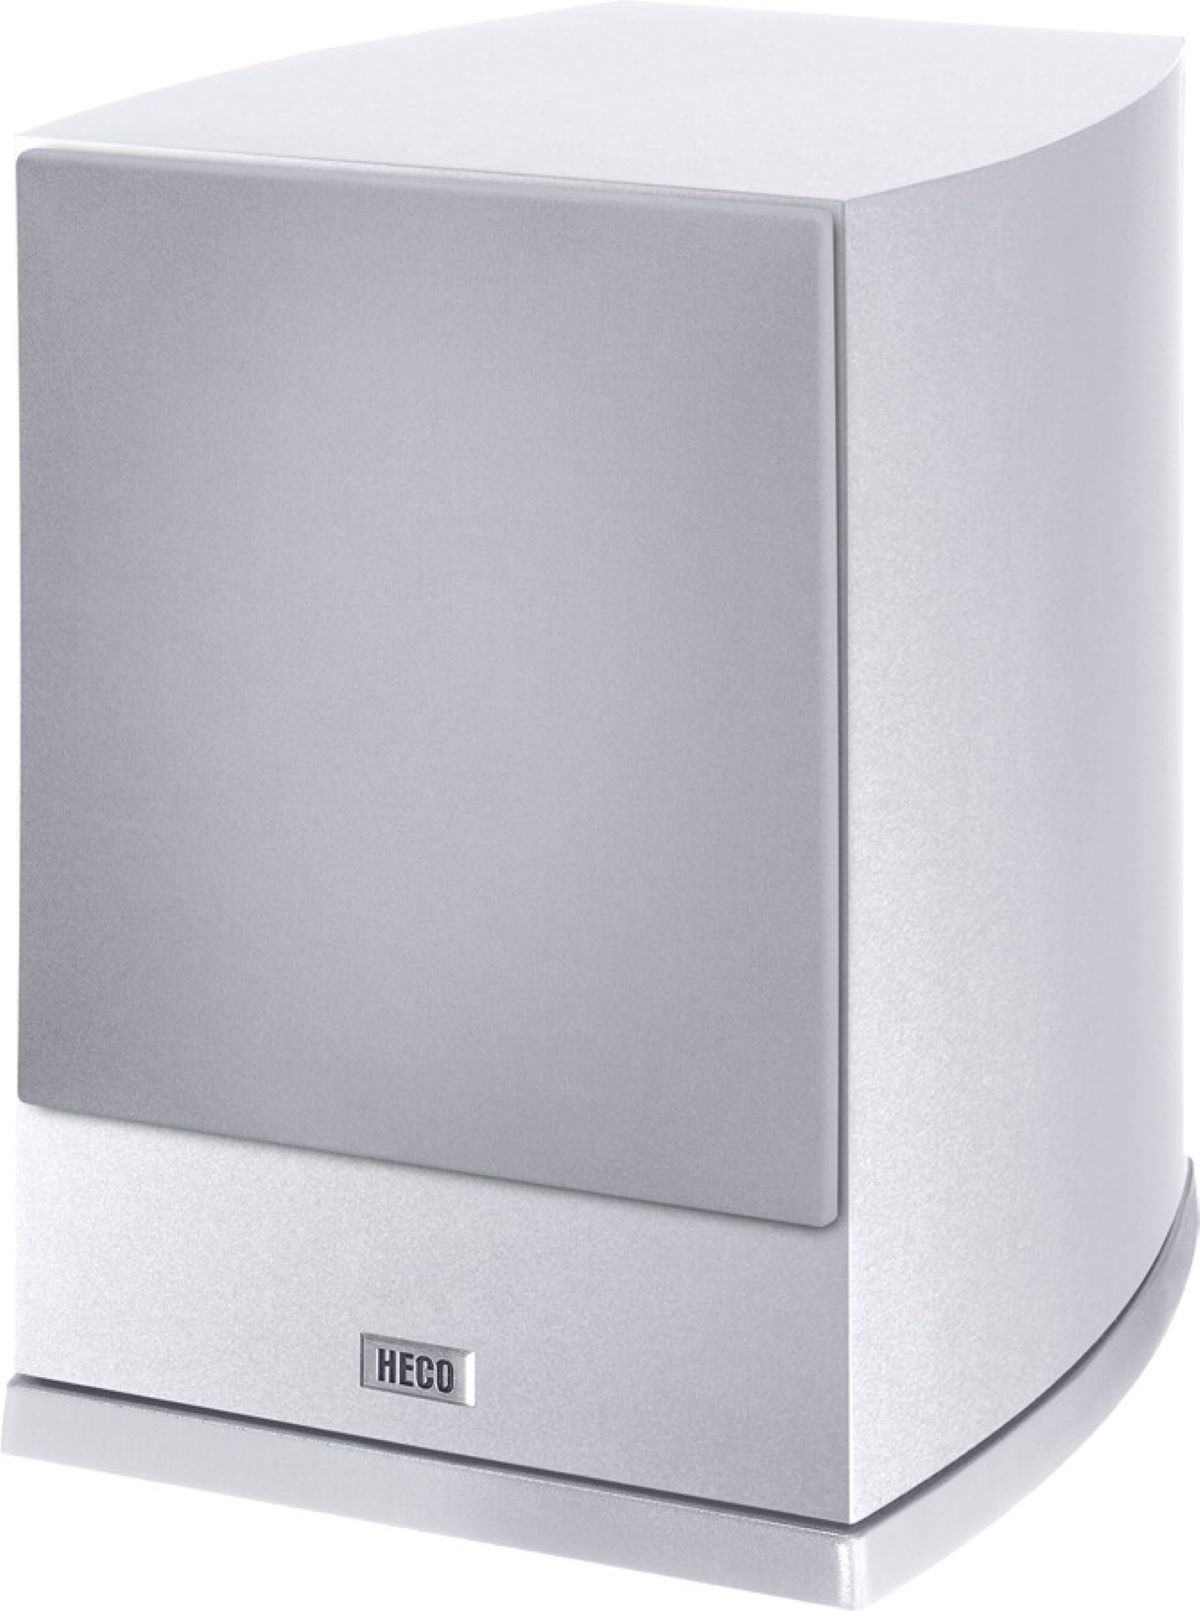 HECO VICTA 252A SUB Subwoofer, ELITE weiss